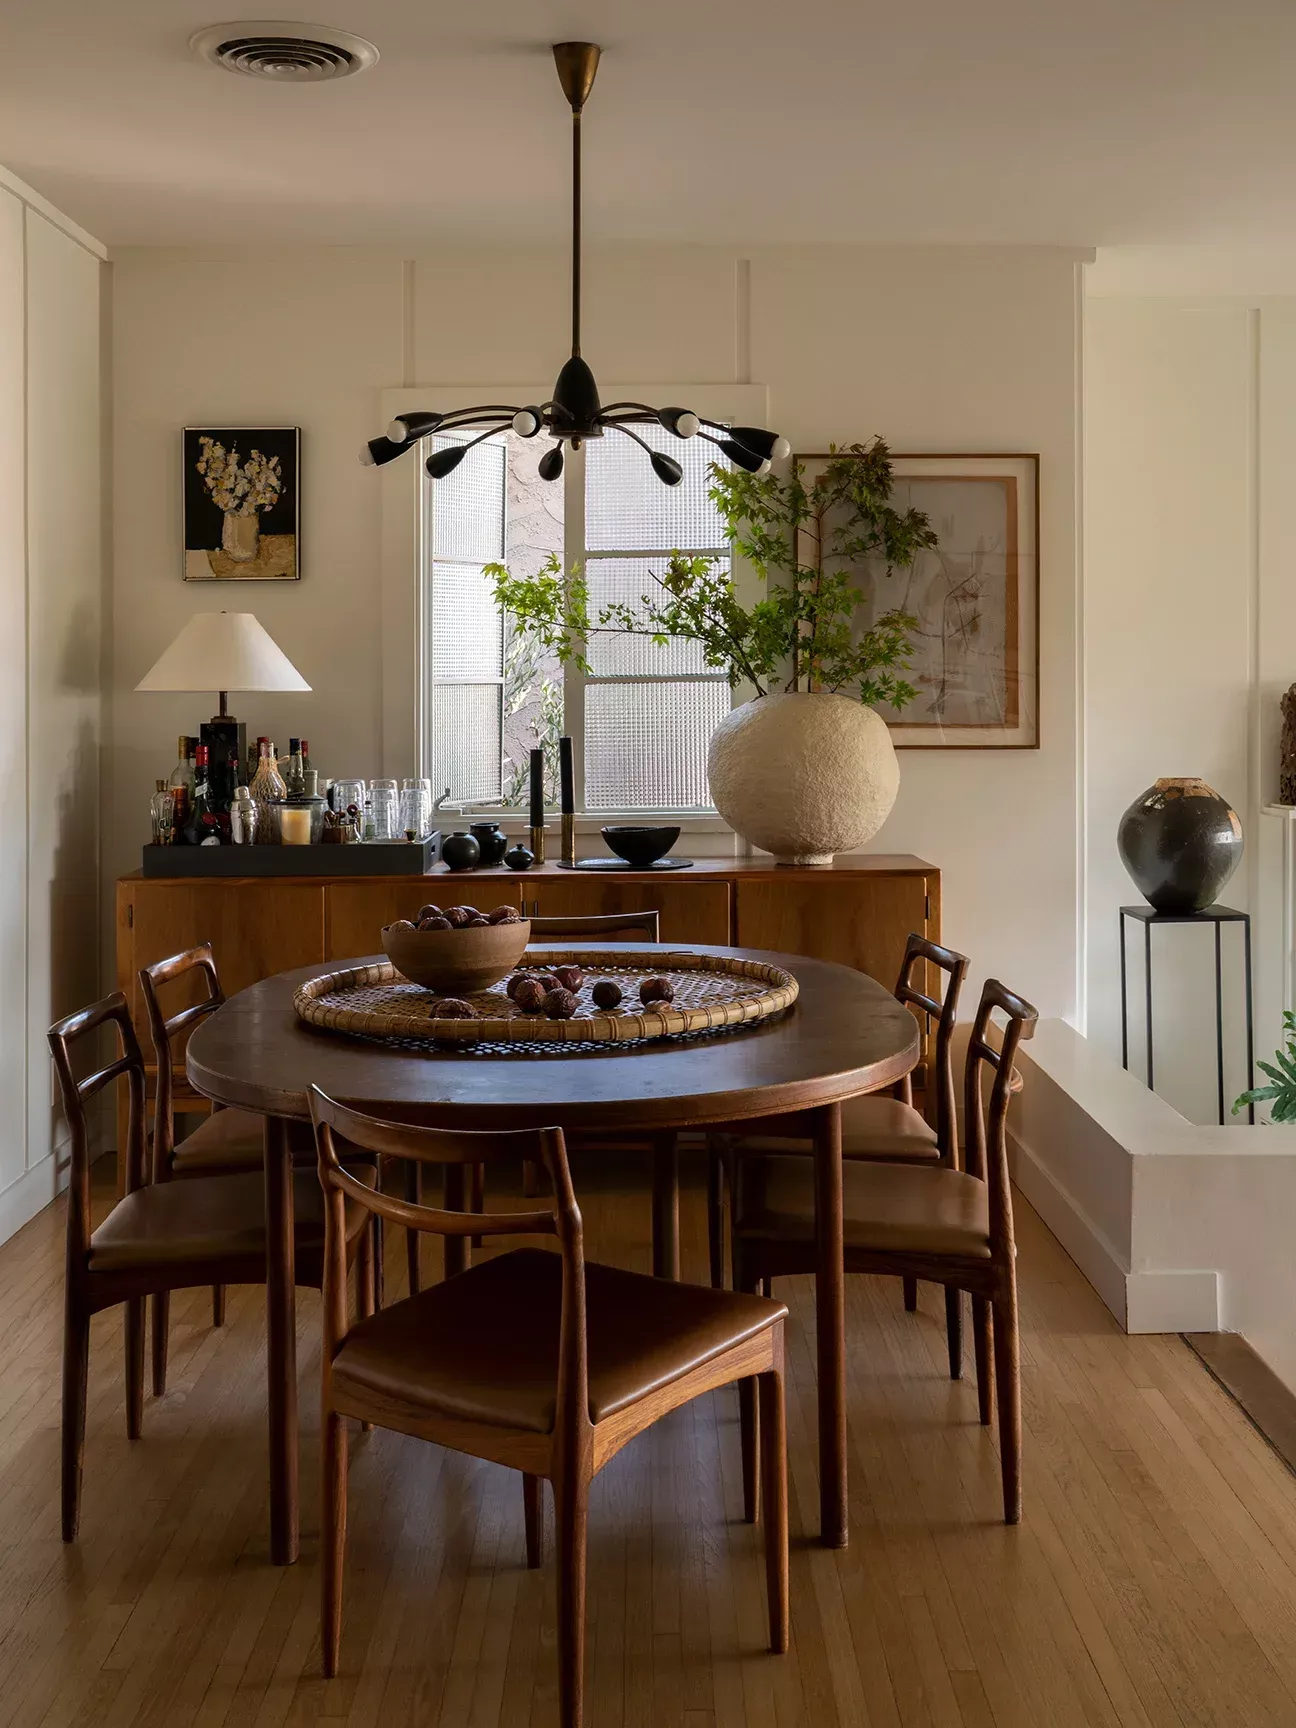 How to modify your dining room design?